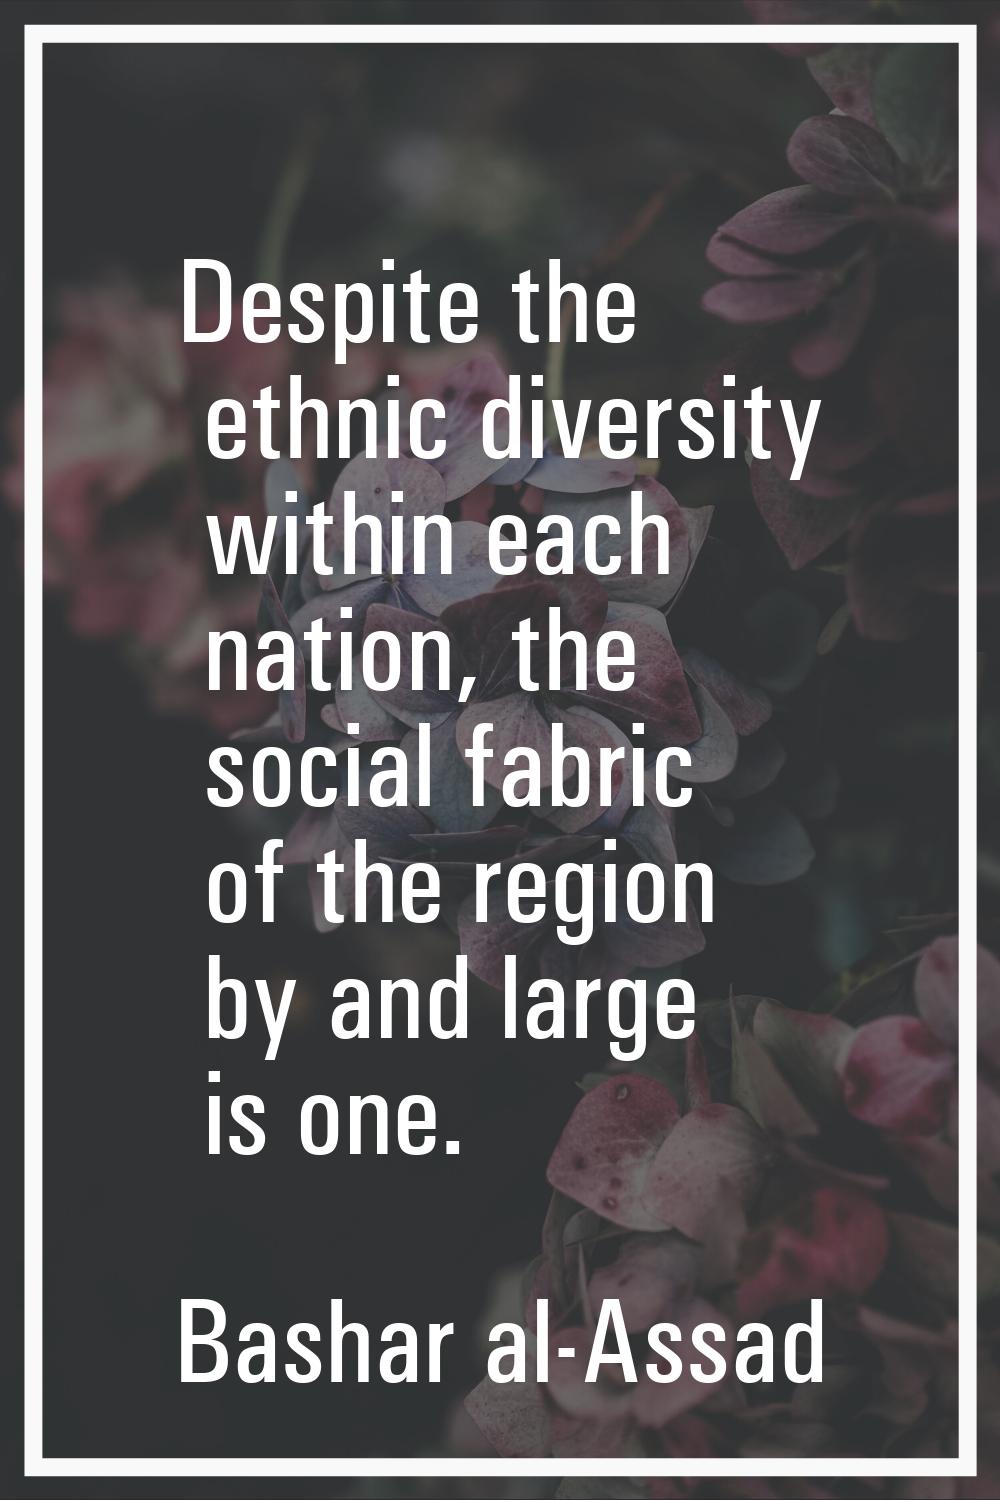 Despite the ethnic diversity within each nation, the social fabric of the region by and large is on